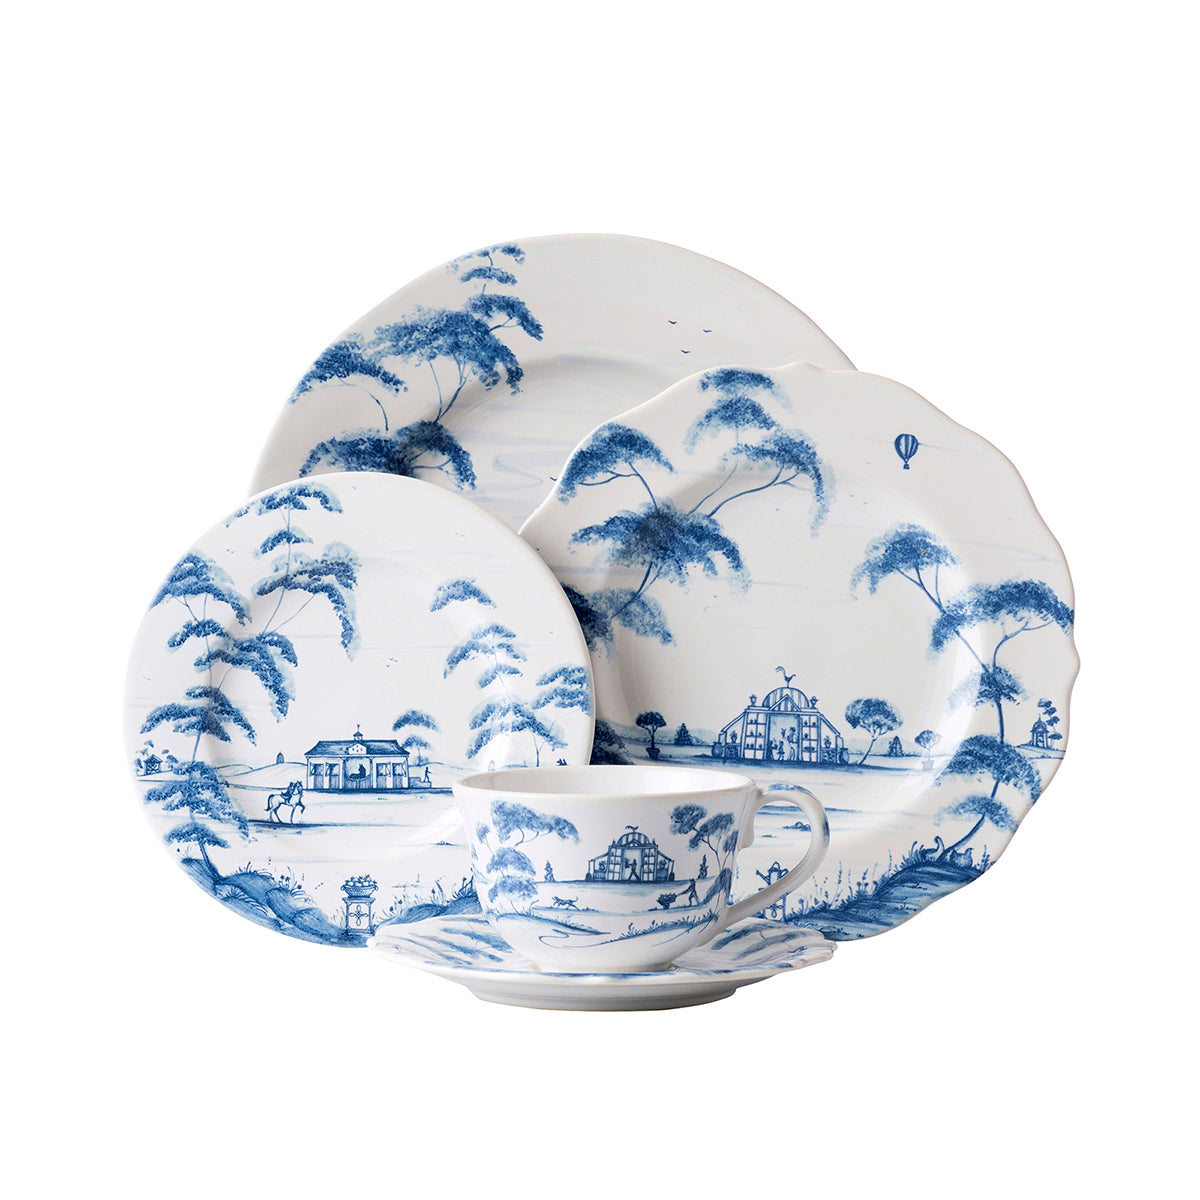 Country Estate Delft Blue Place Setting, Set of 5